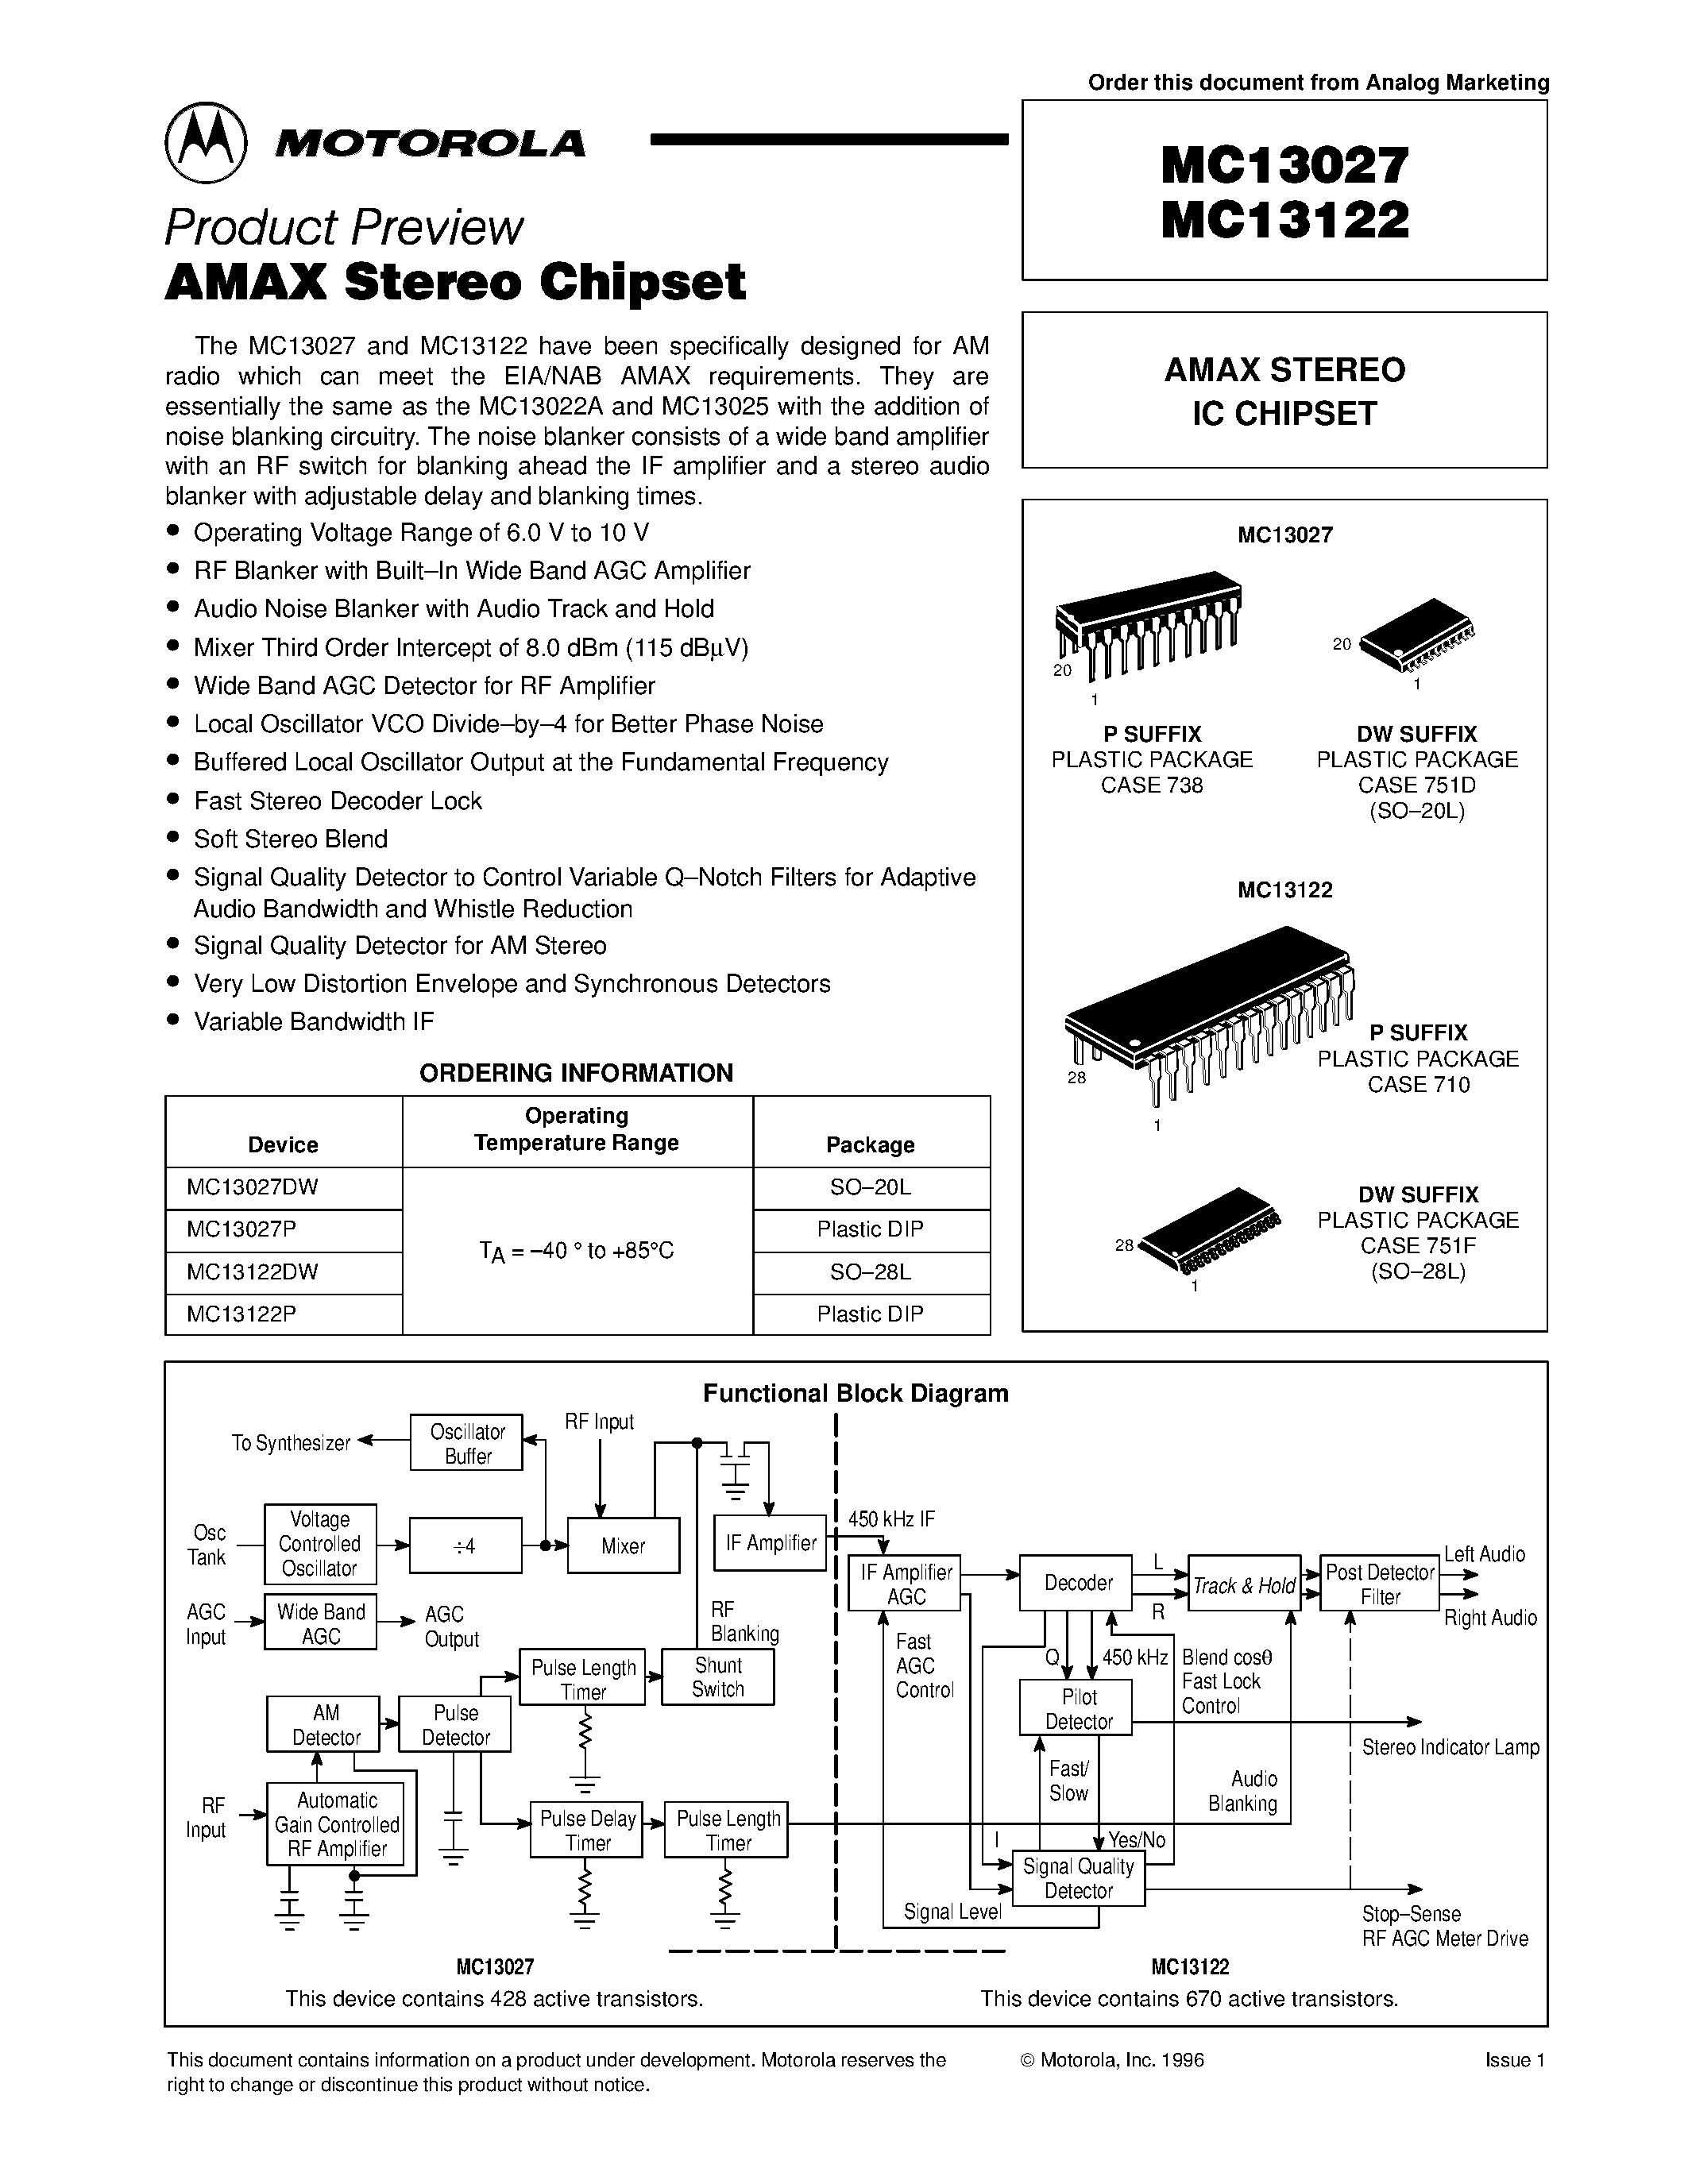 Datasheet MC13027DW - AMAX STEREO IC CHIPSET page 1